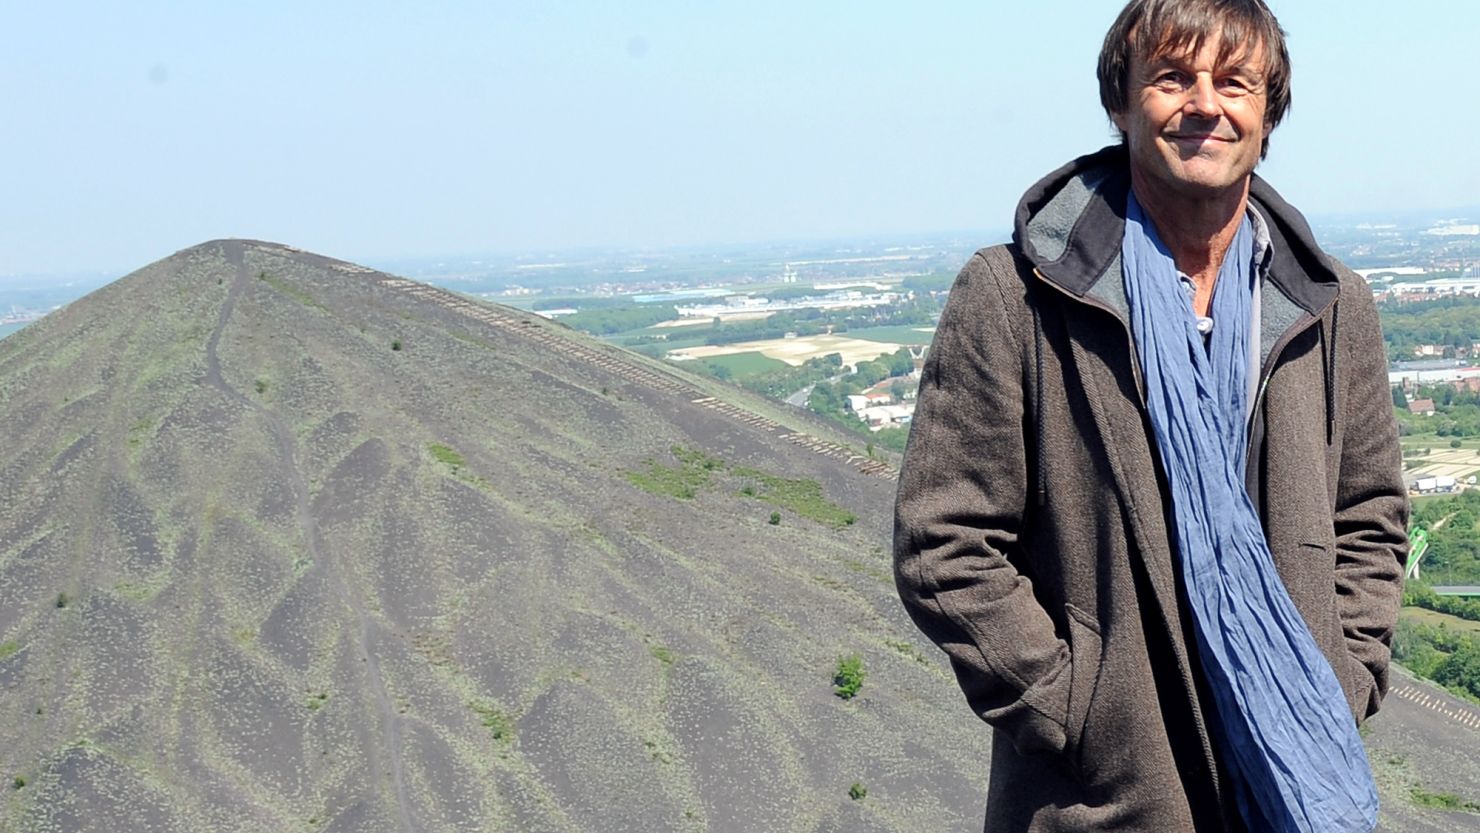 Former French presidential candidate Nicolas Hulot pictured close to a giant coal slag heap in the mining region of Pas de Calais.